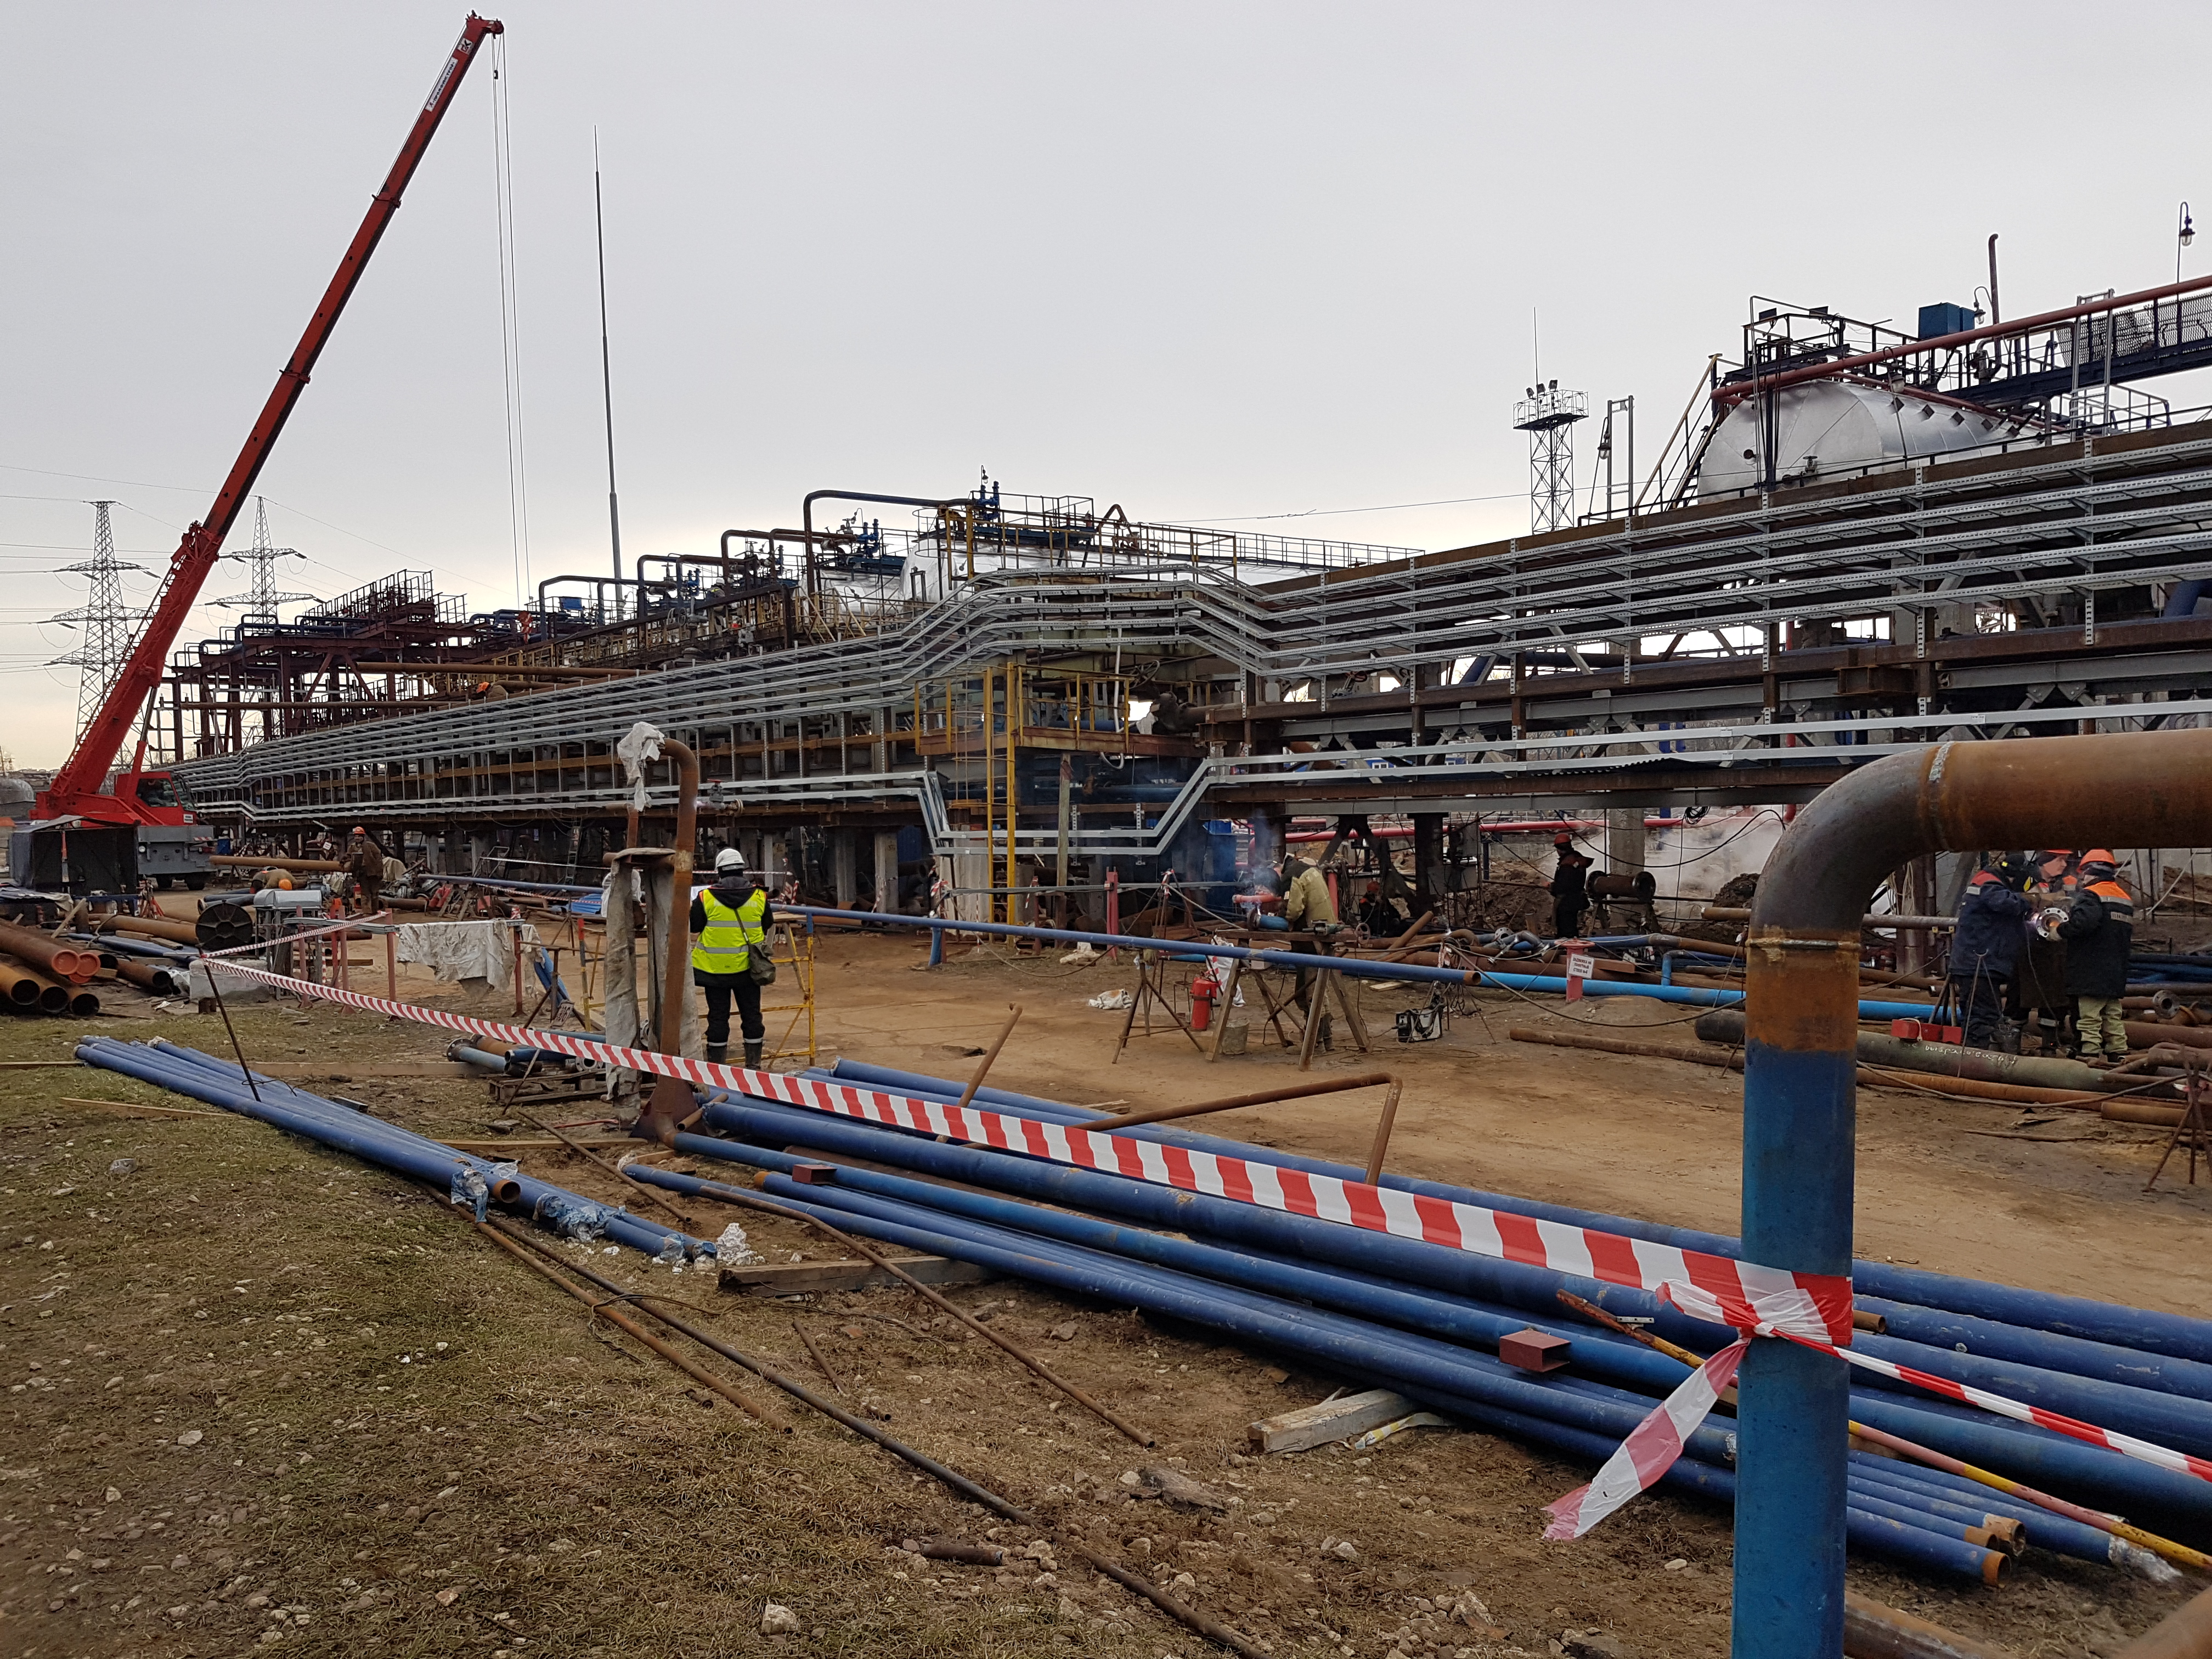 GAZPROMNEFT AO – Moscow Refinery». Gas distribution station. Upgrading. 2015-2017.